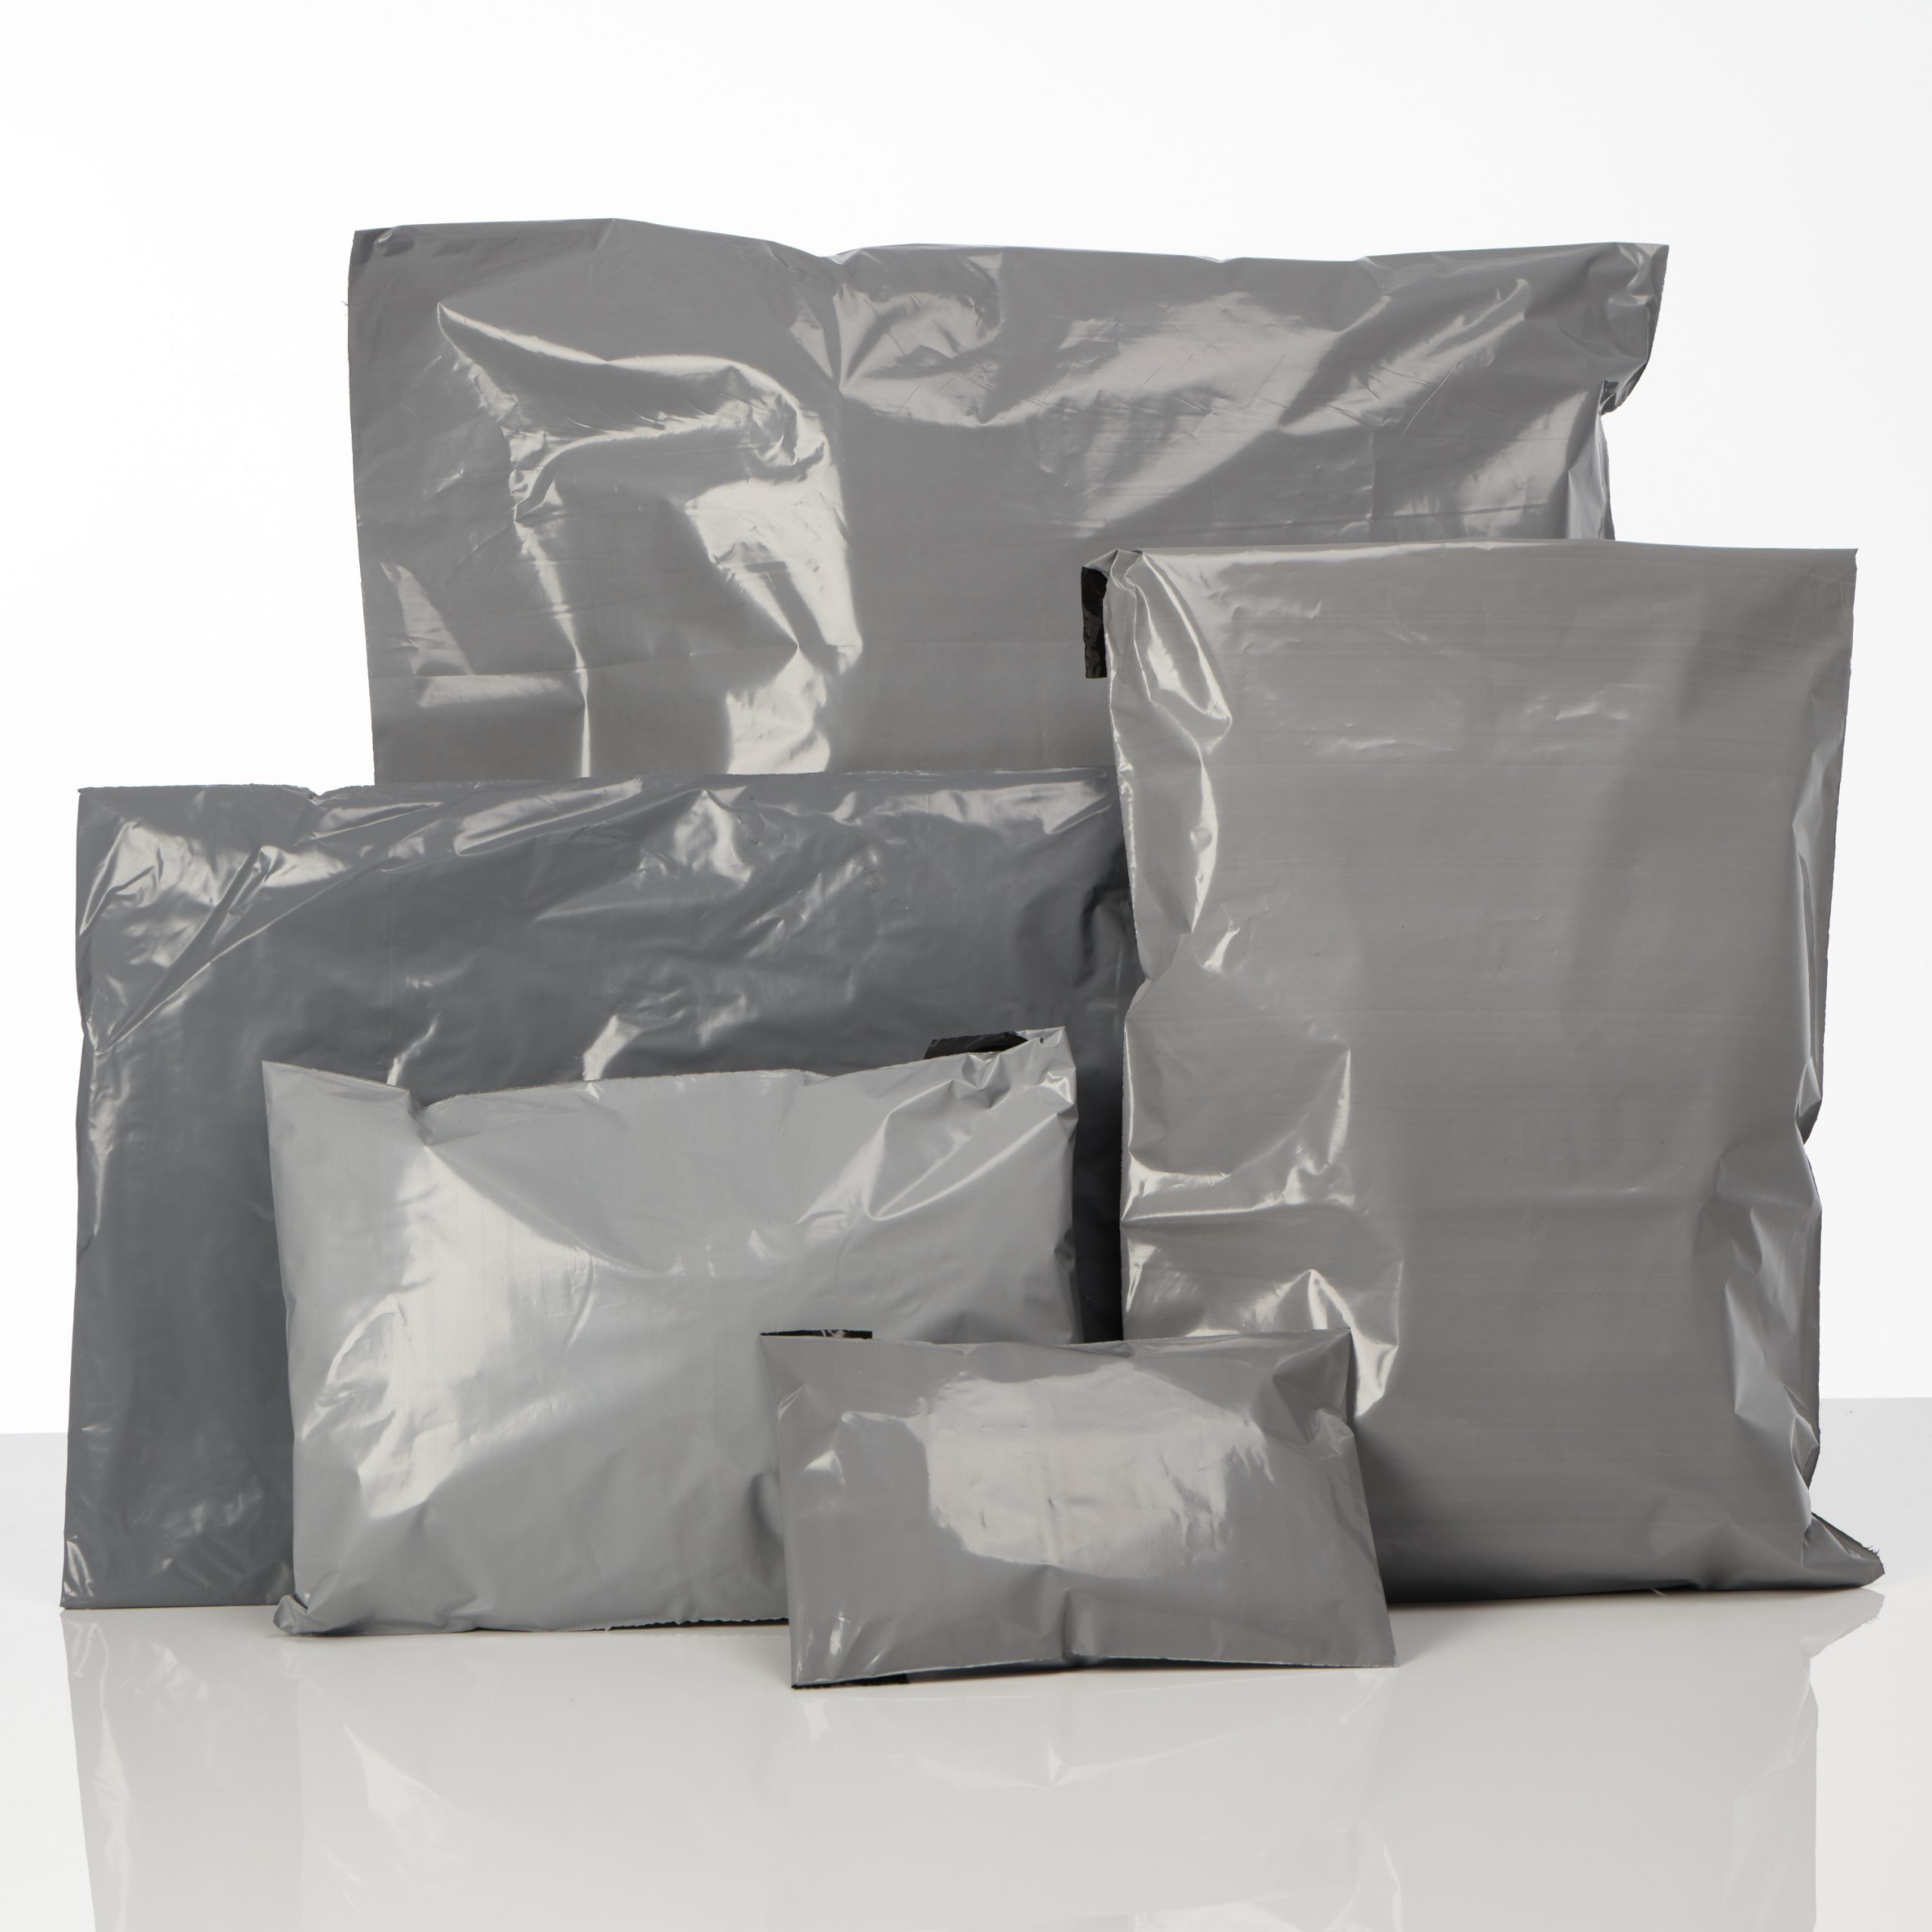 Grey Colour Mailing bags Parcel Bags Polythene Plastic sizes Available in Inches 